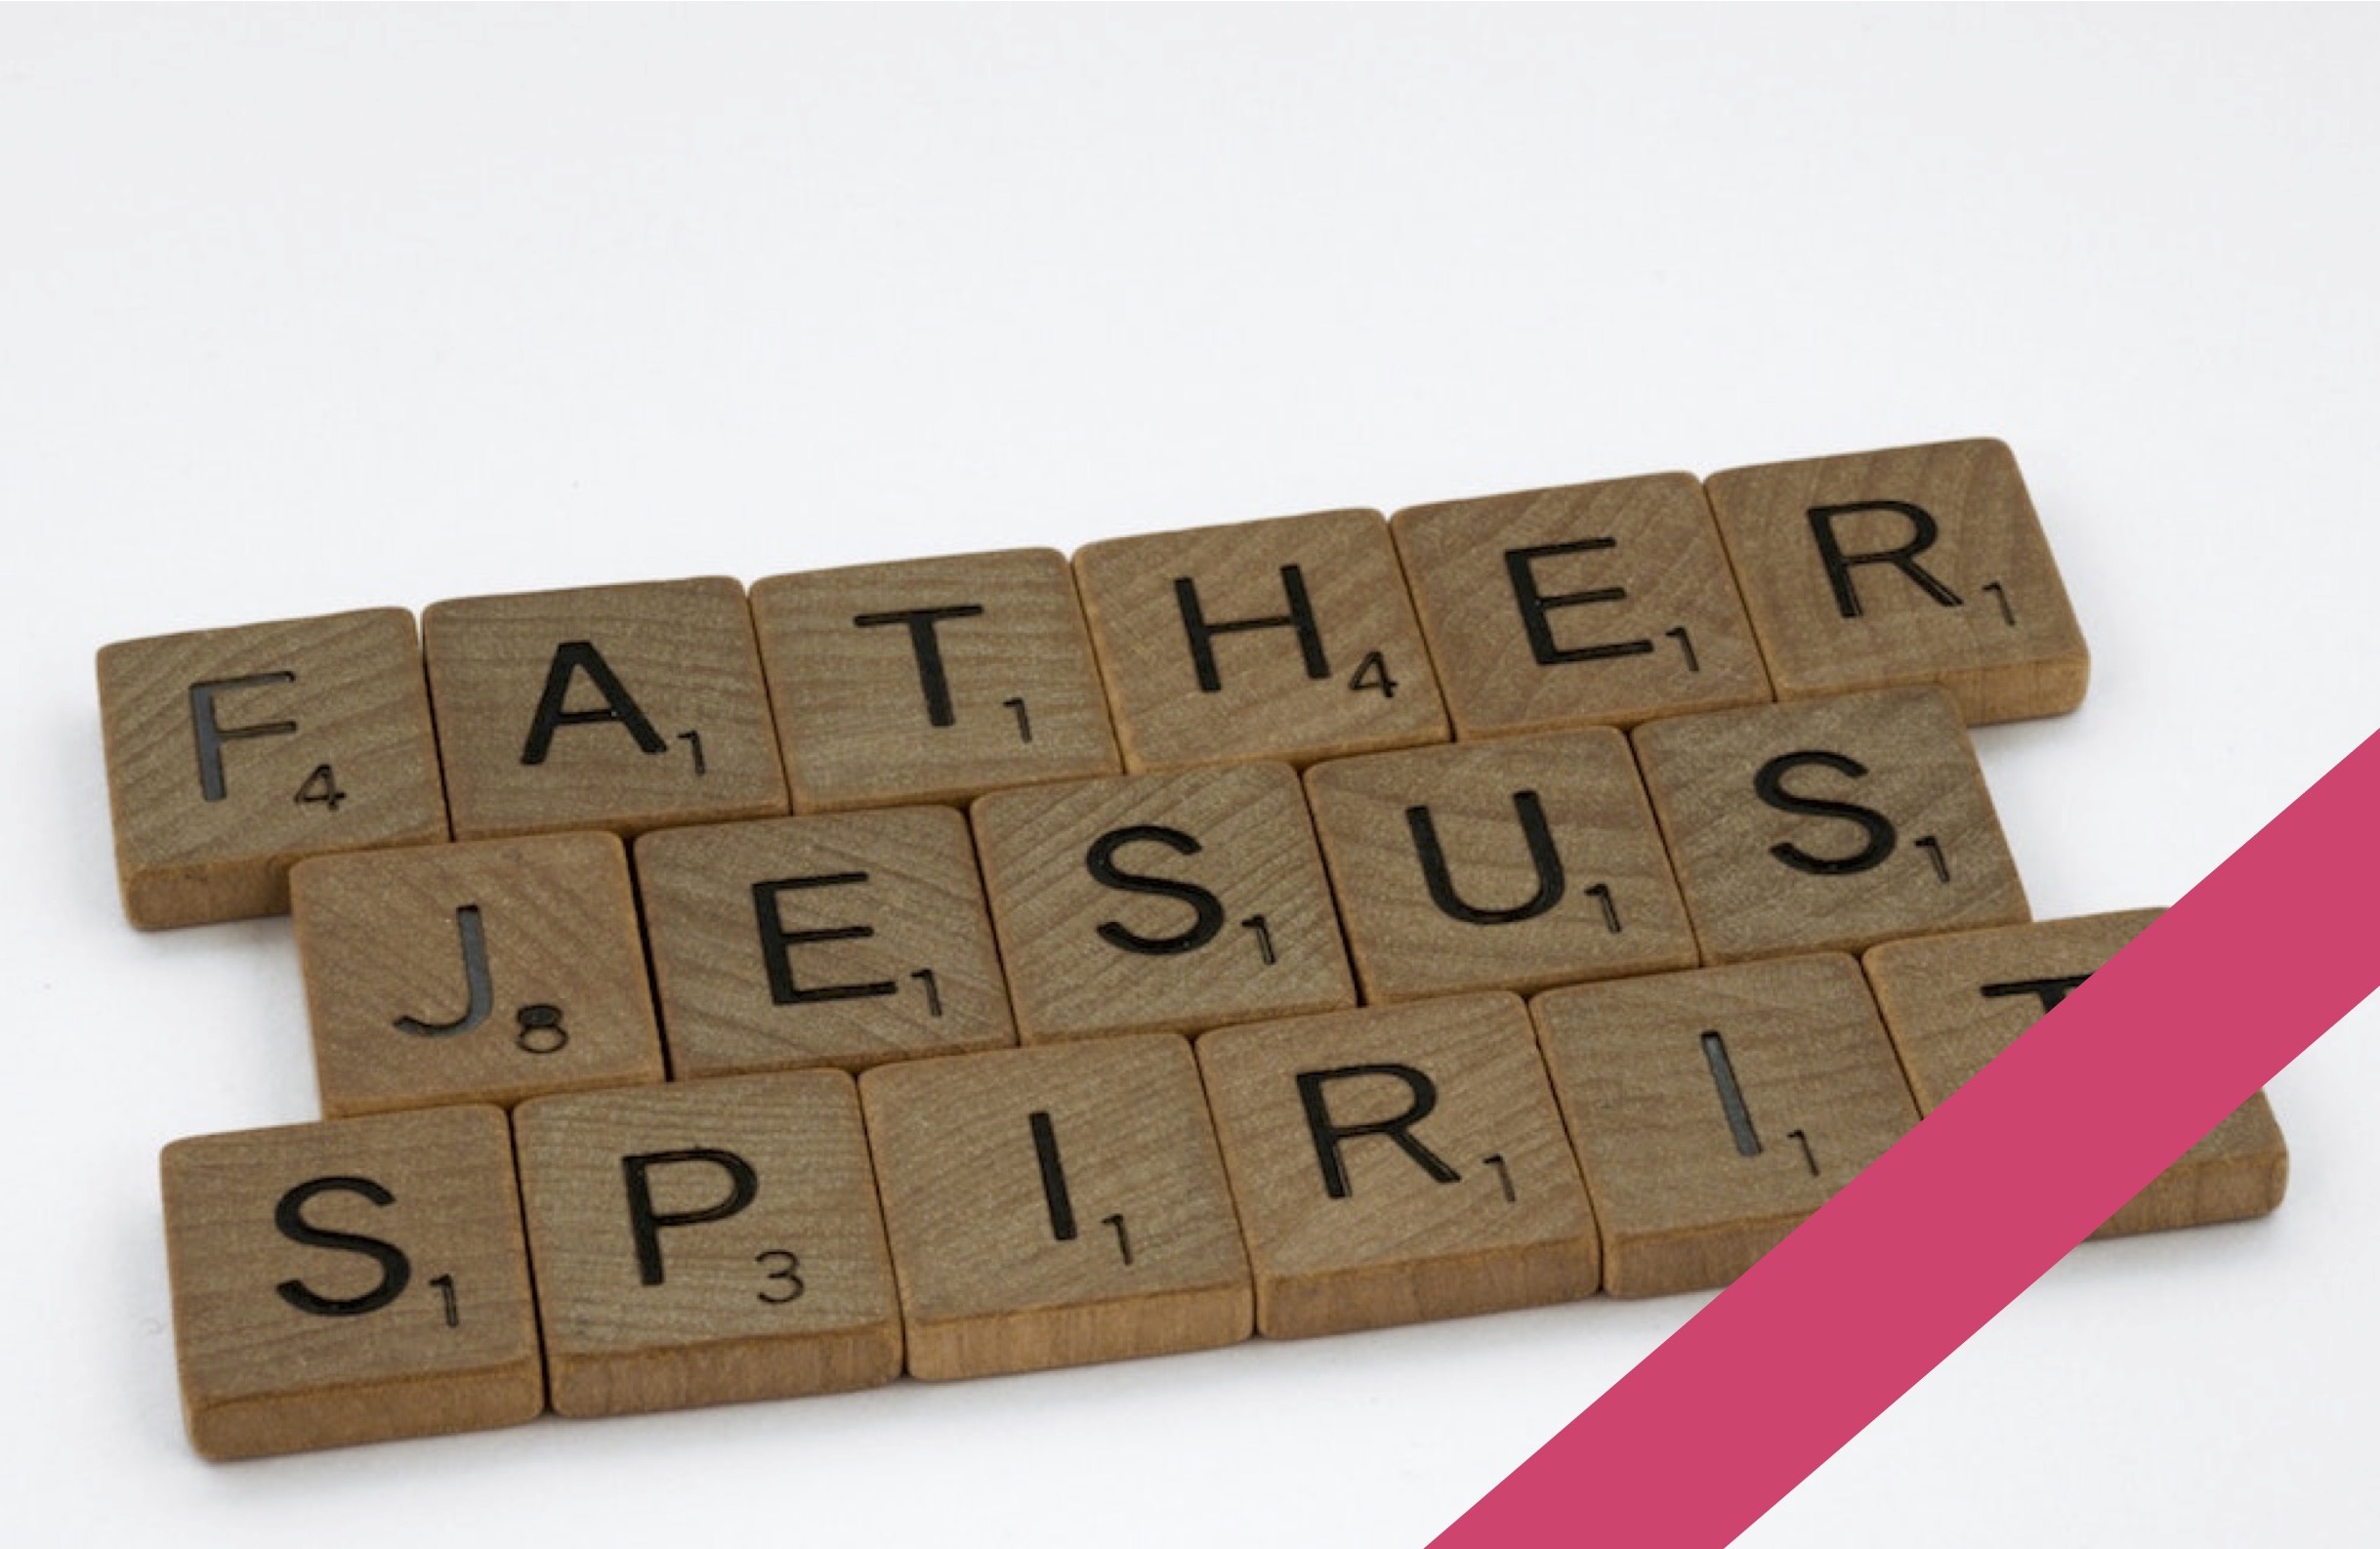 Father, Jesus and Spirit spelled out in Scrabble tiles